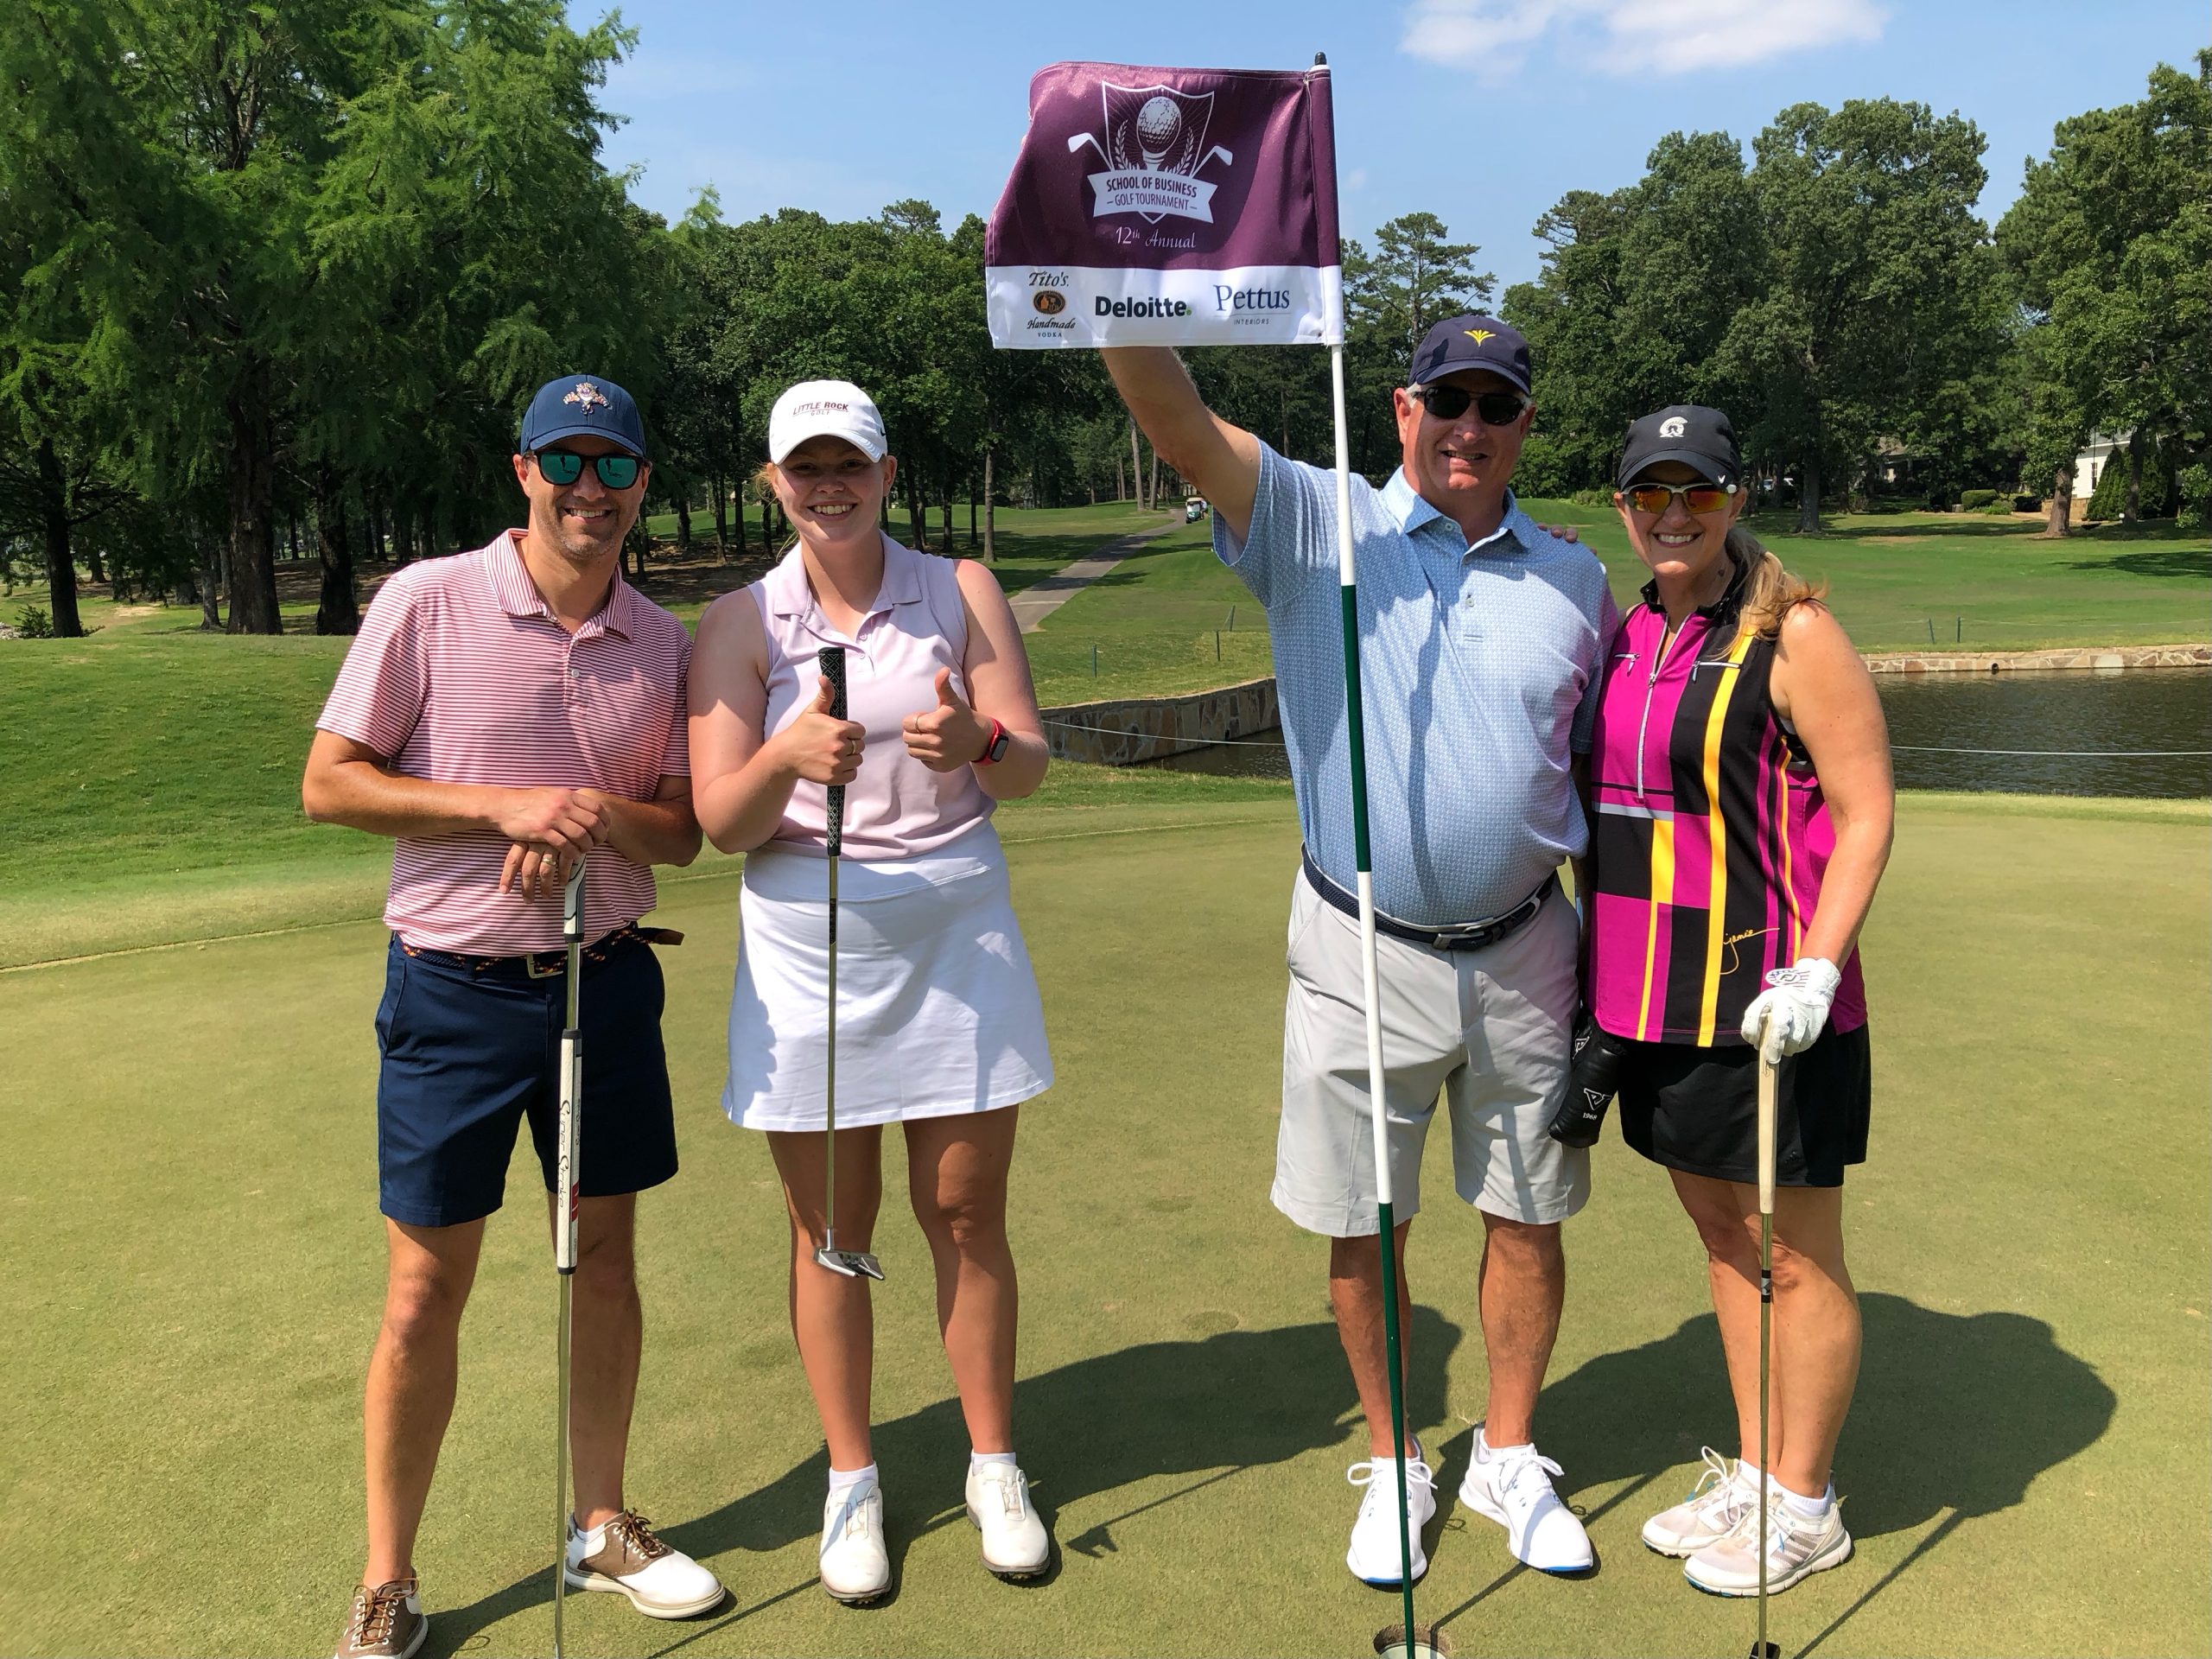 Community supports participate in the 12th Annual School of Business Golf Tournament at Pleasant Valley Country Club. Photo by Nelson Chenault.